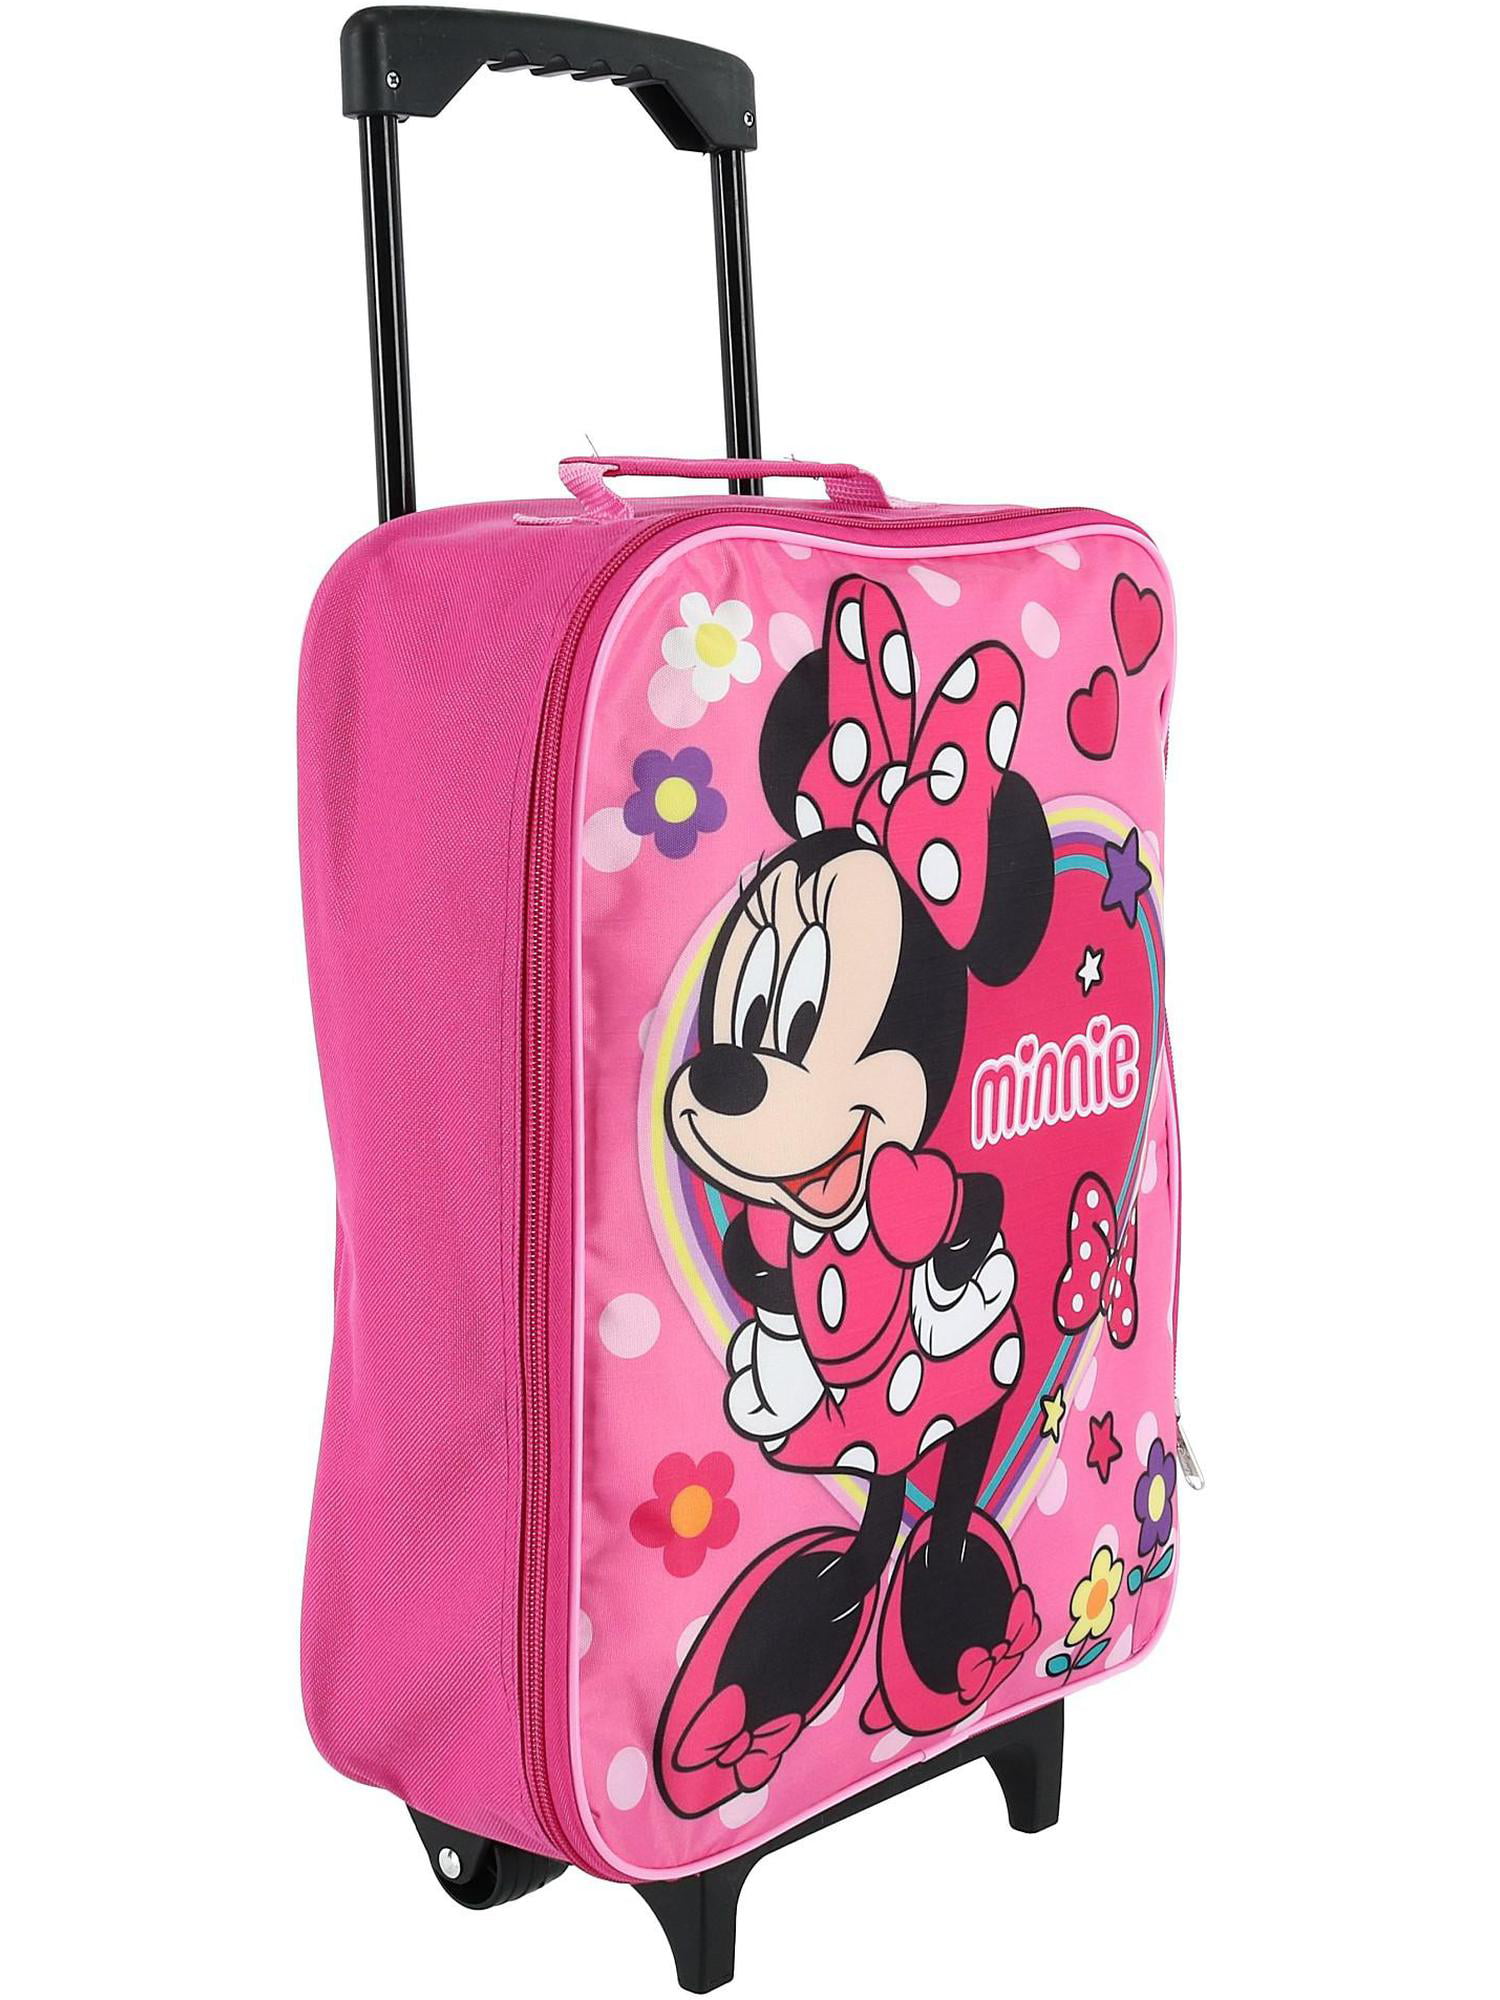 Disney Stitch Carry on Suitcase for Kids Cabin Bag with Wheels Luggage Bag for Girls Boys Carry on Minnie Mouse Travel Bag with Wheels and Handle